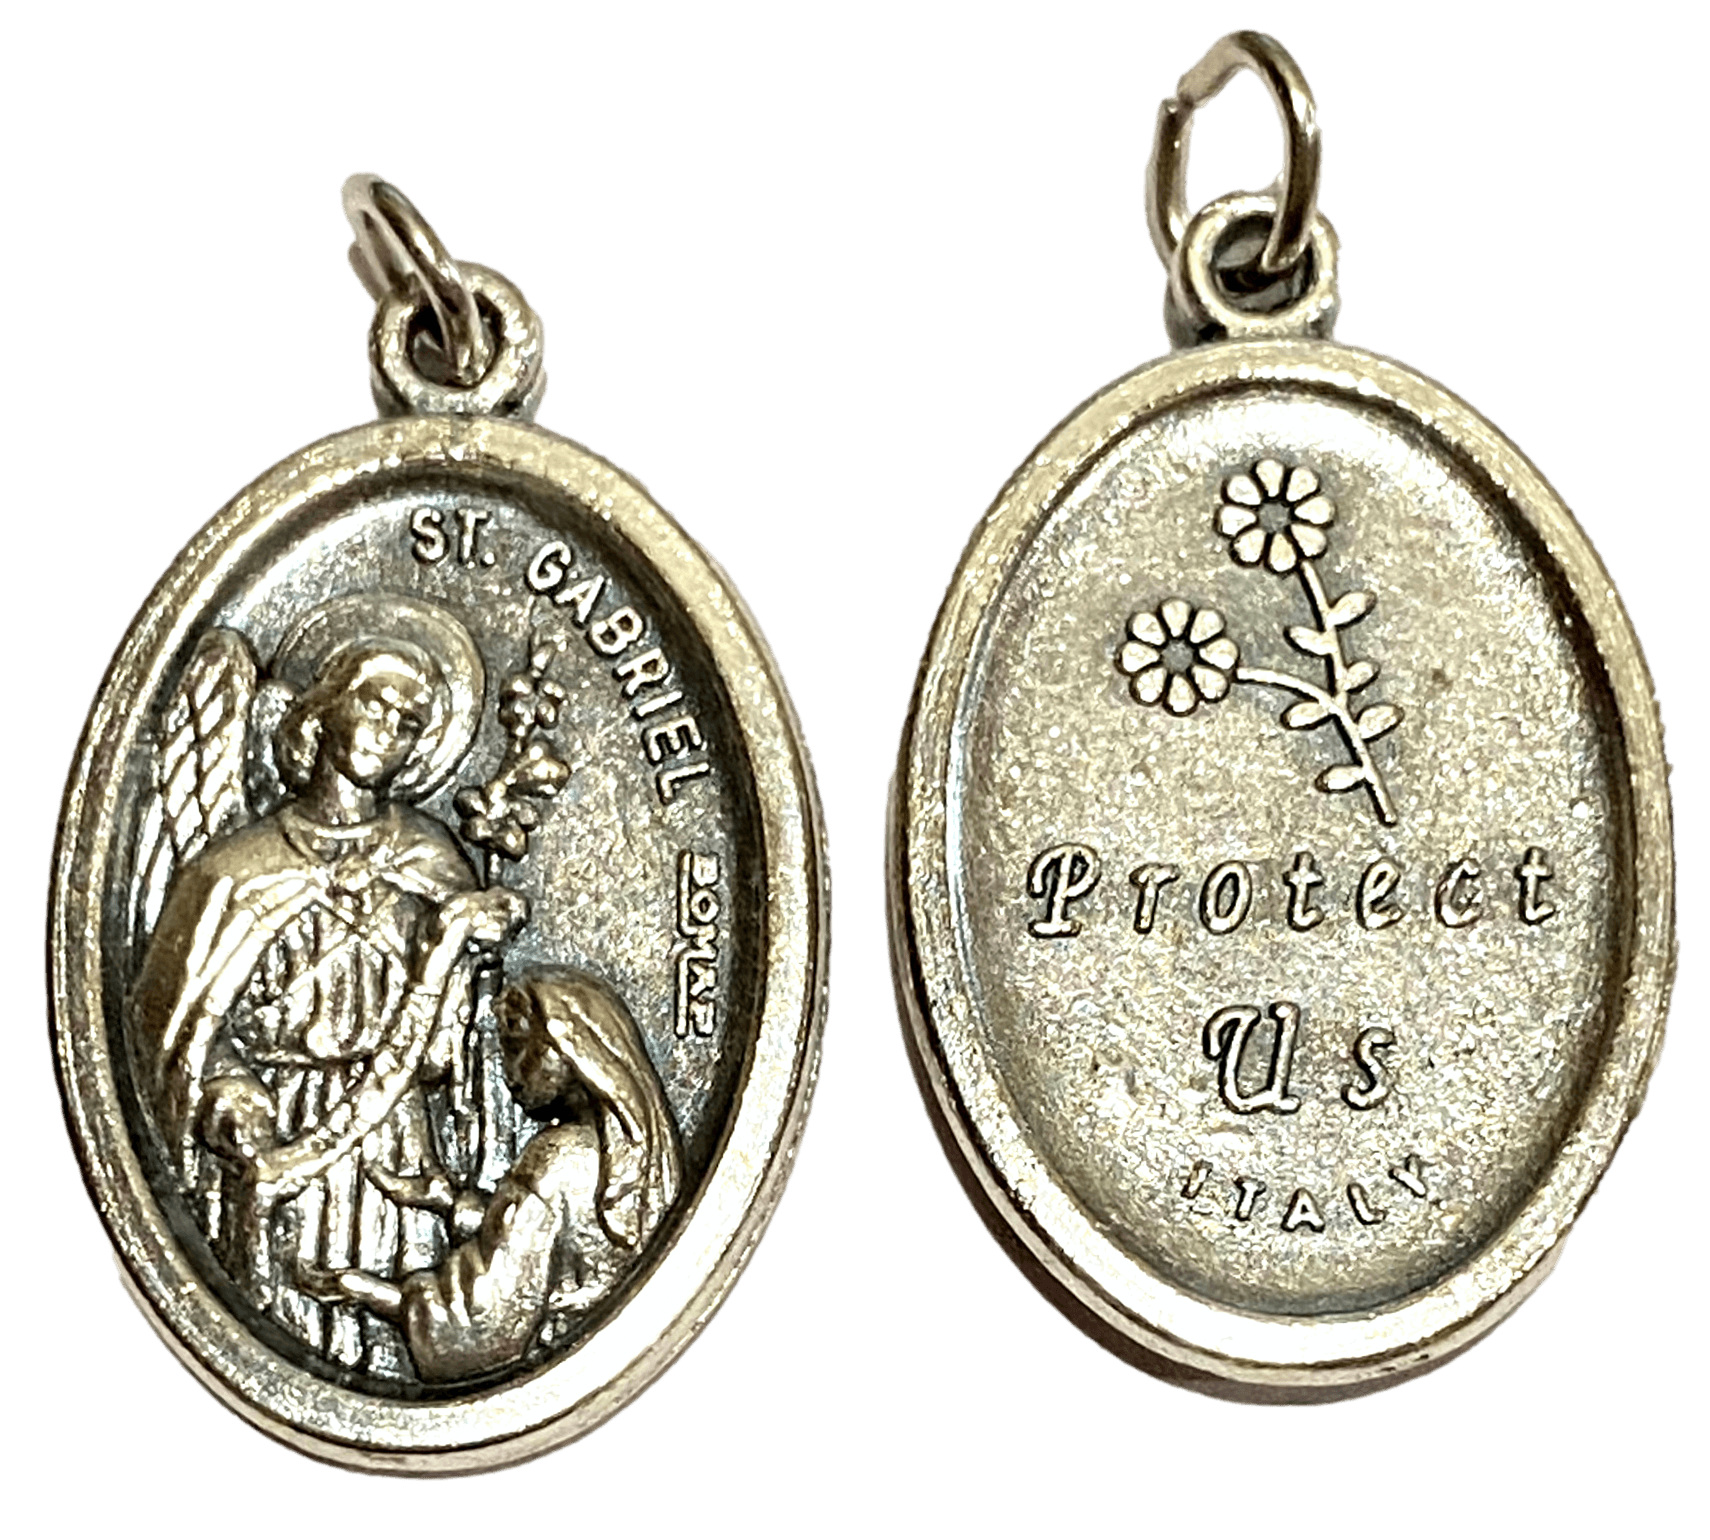 Medal Saint Gabriel Protect Us Italian Double-Sided Silver Oxidized Metal Alloy 1 inch - Ysleta Mission Gift Shop- VOTED El Paso's Best Gift Shop